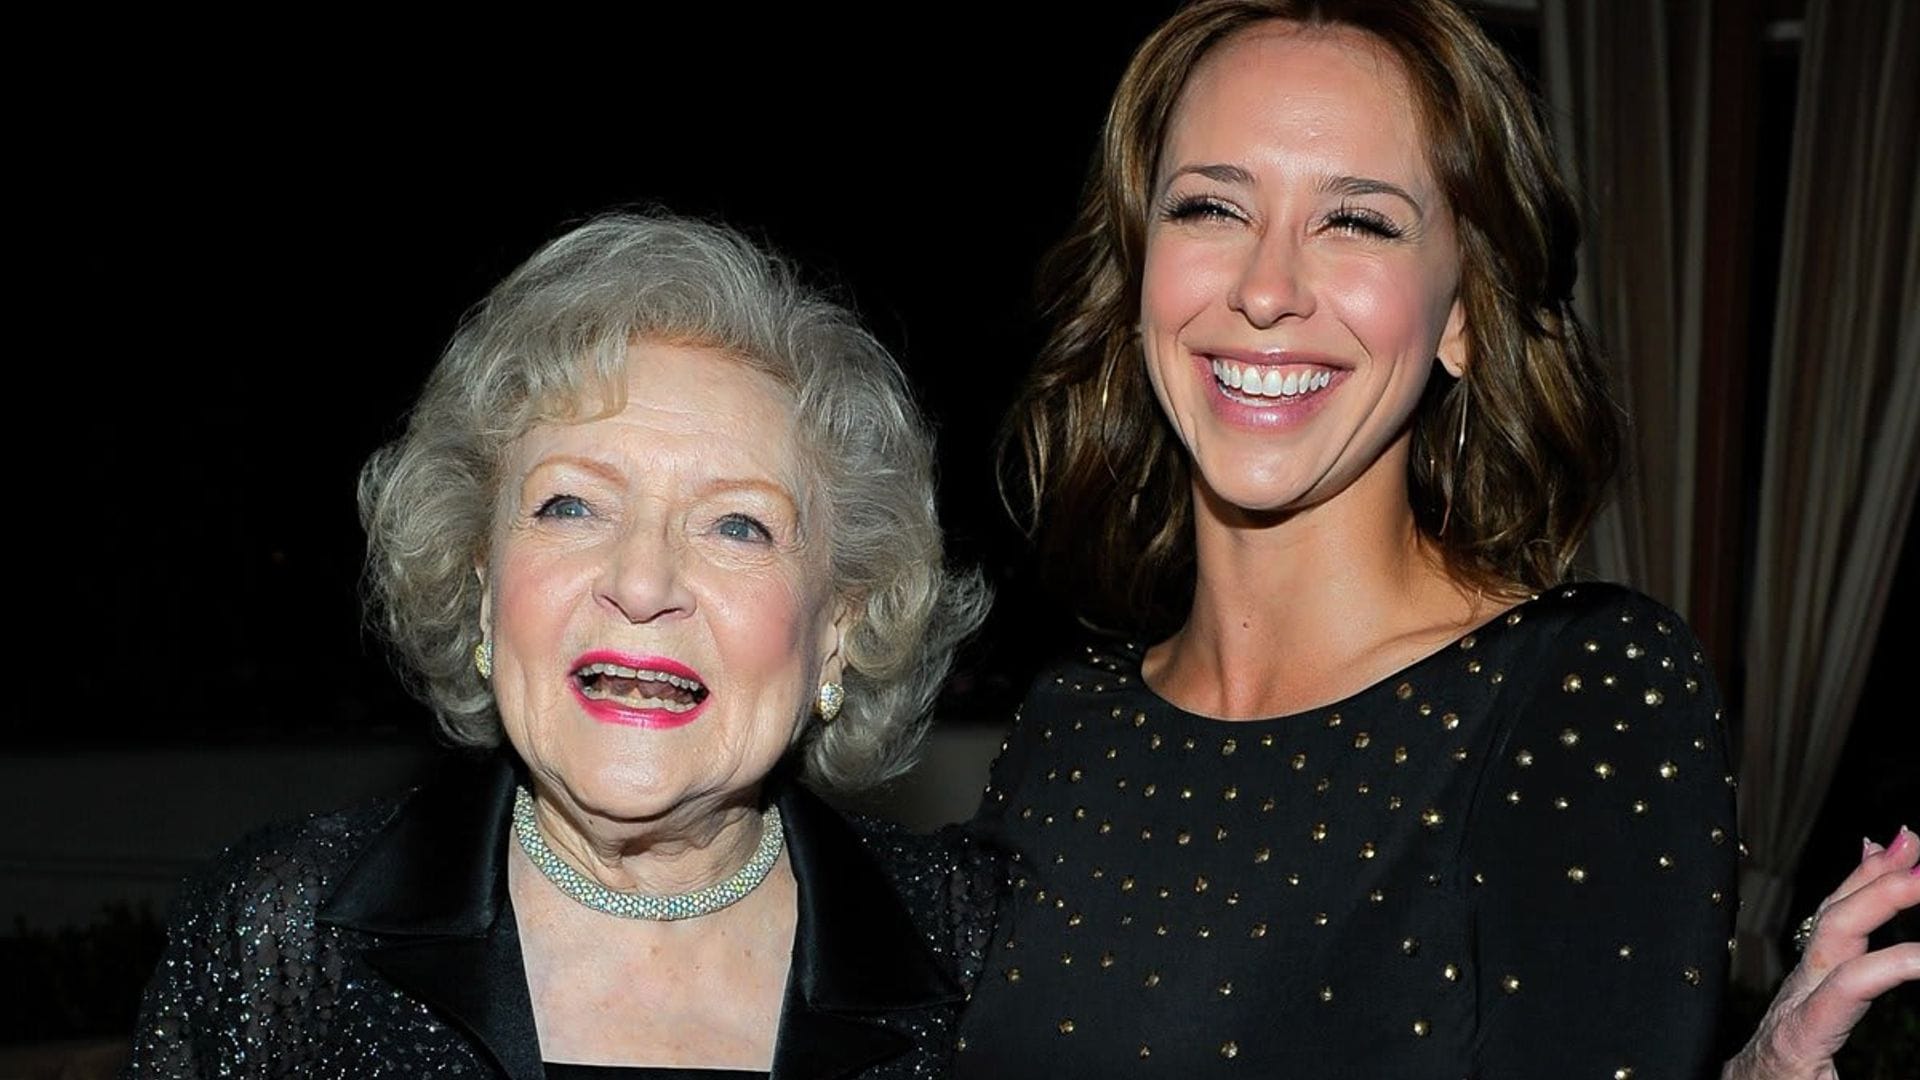 Jennifer Love Hewitt jokingly recalls when she was ‘going to kill’ Betty White during a drunk night out